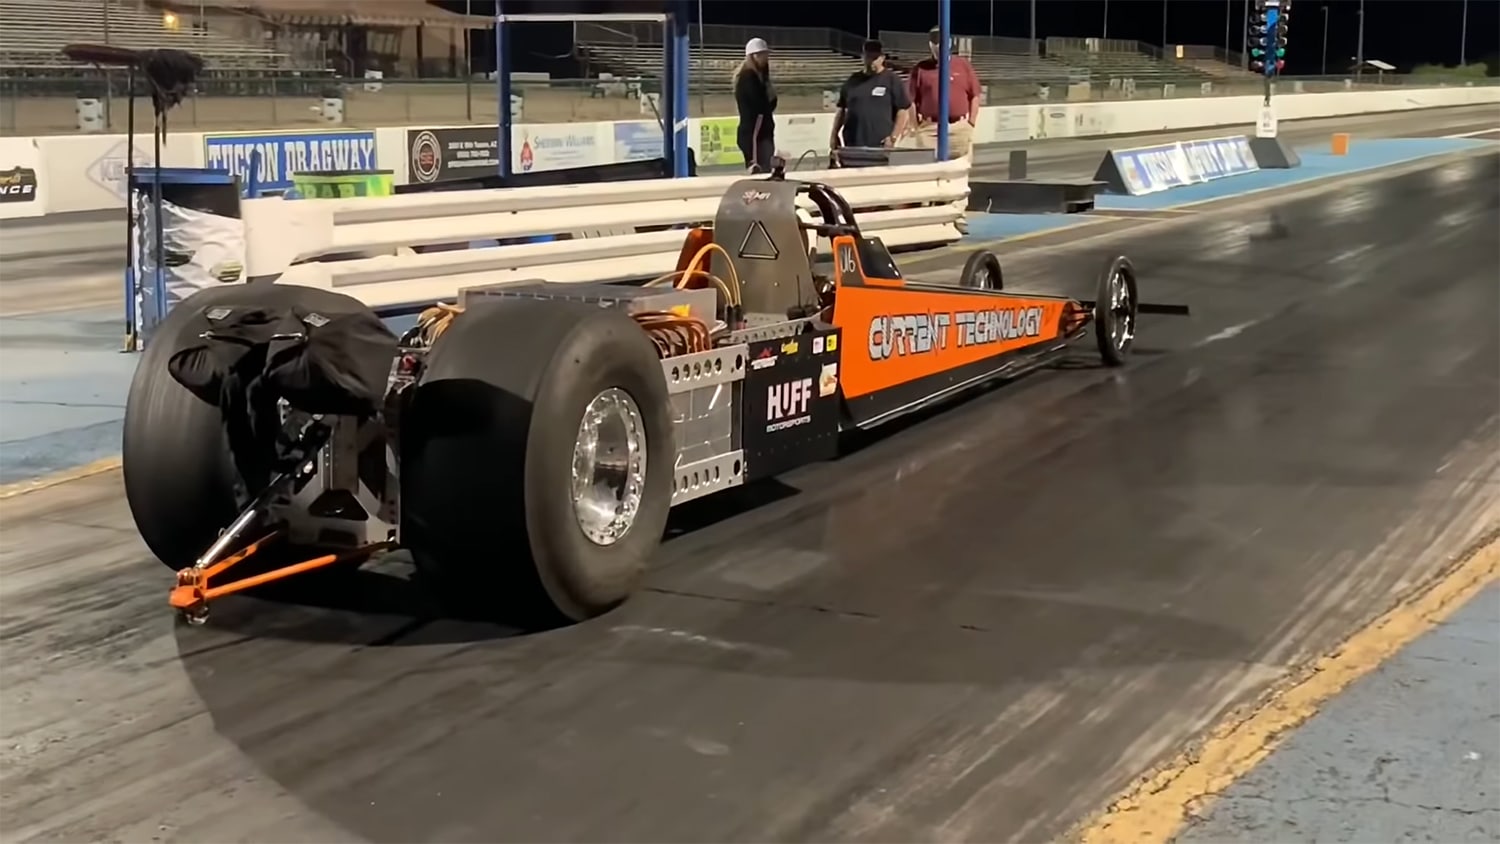 Steve Huff's all-electric dragster sets world speed record for 1/4 mile.